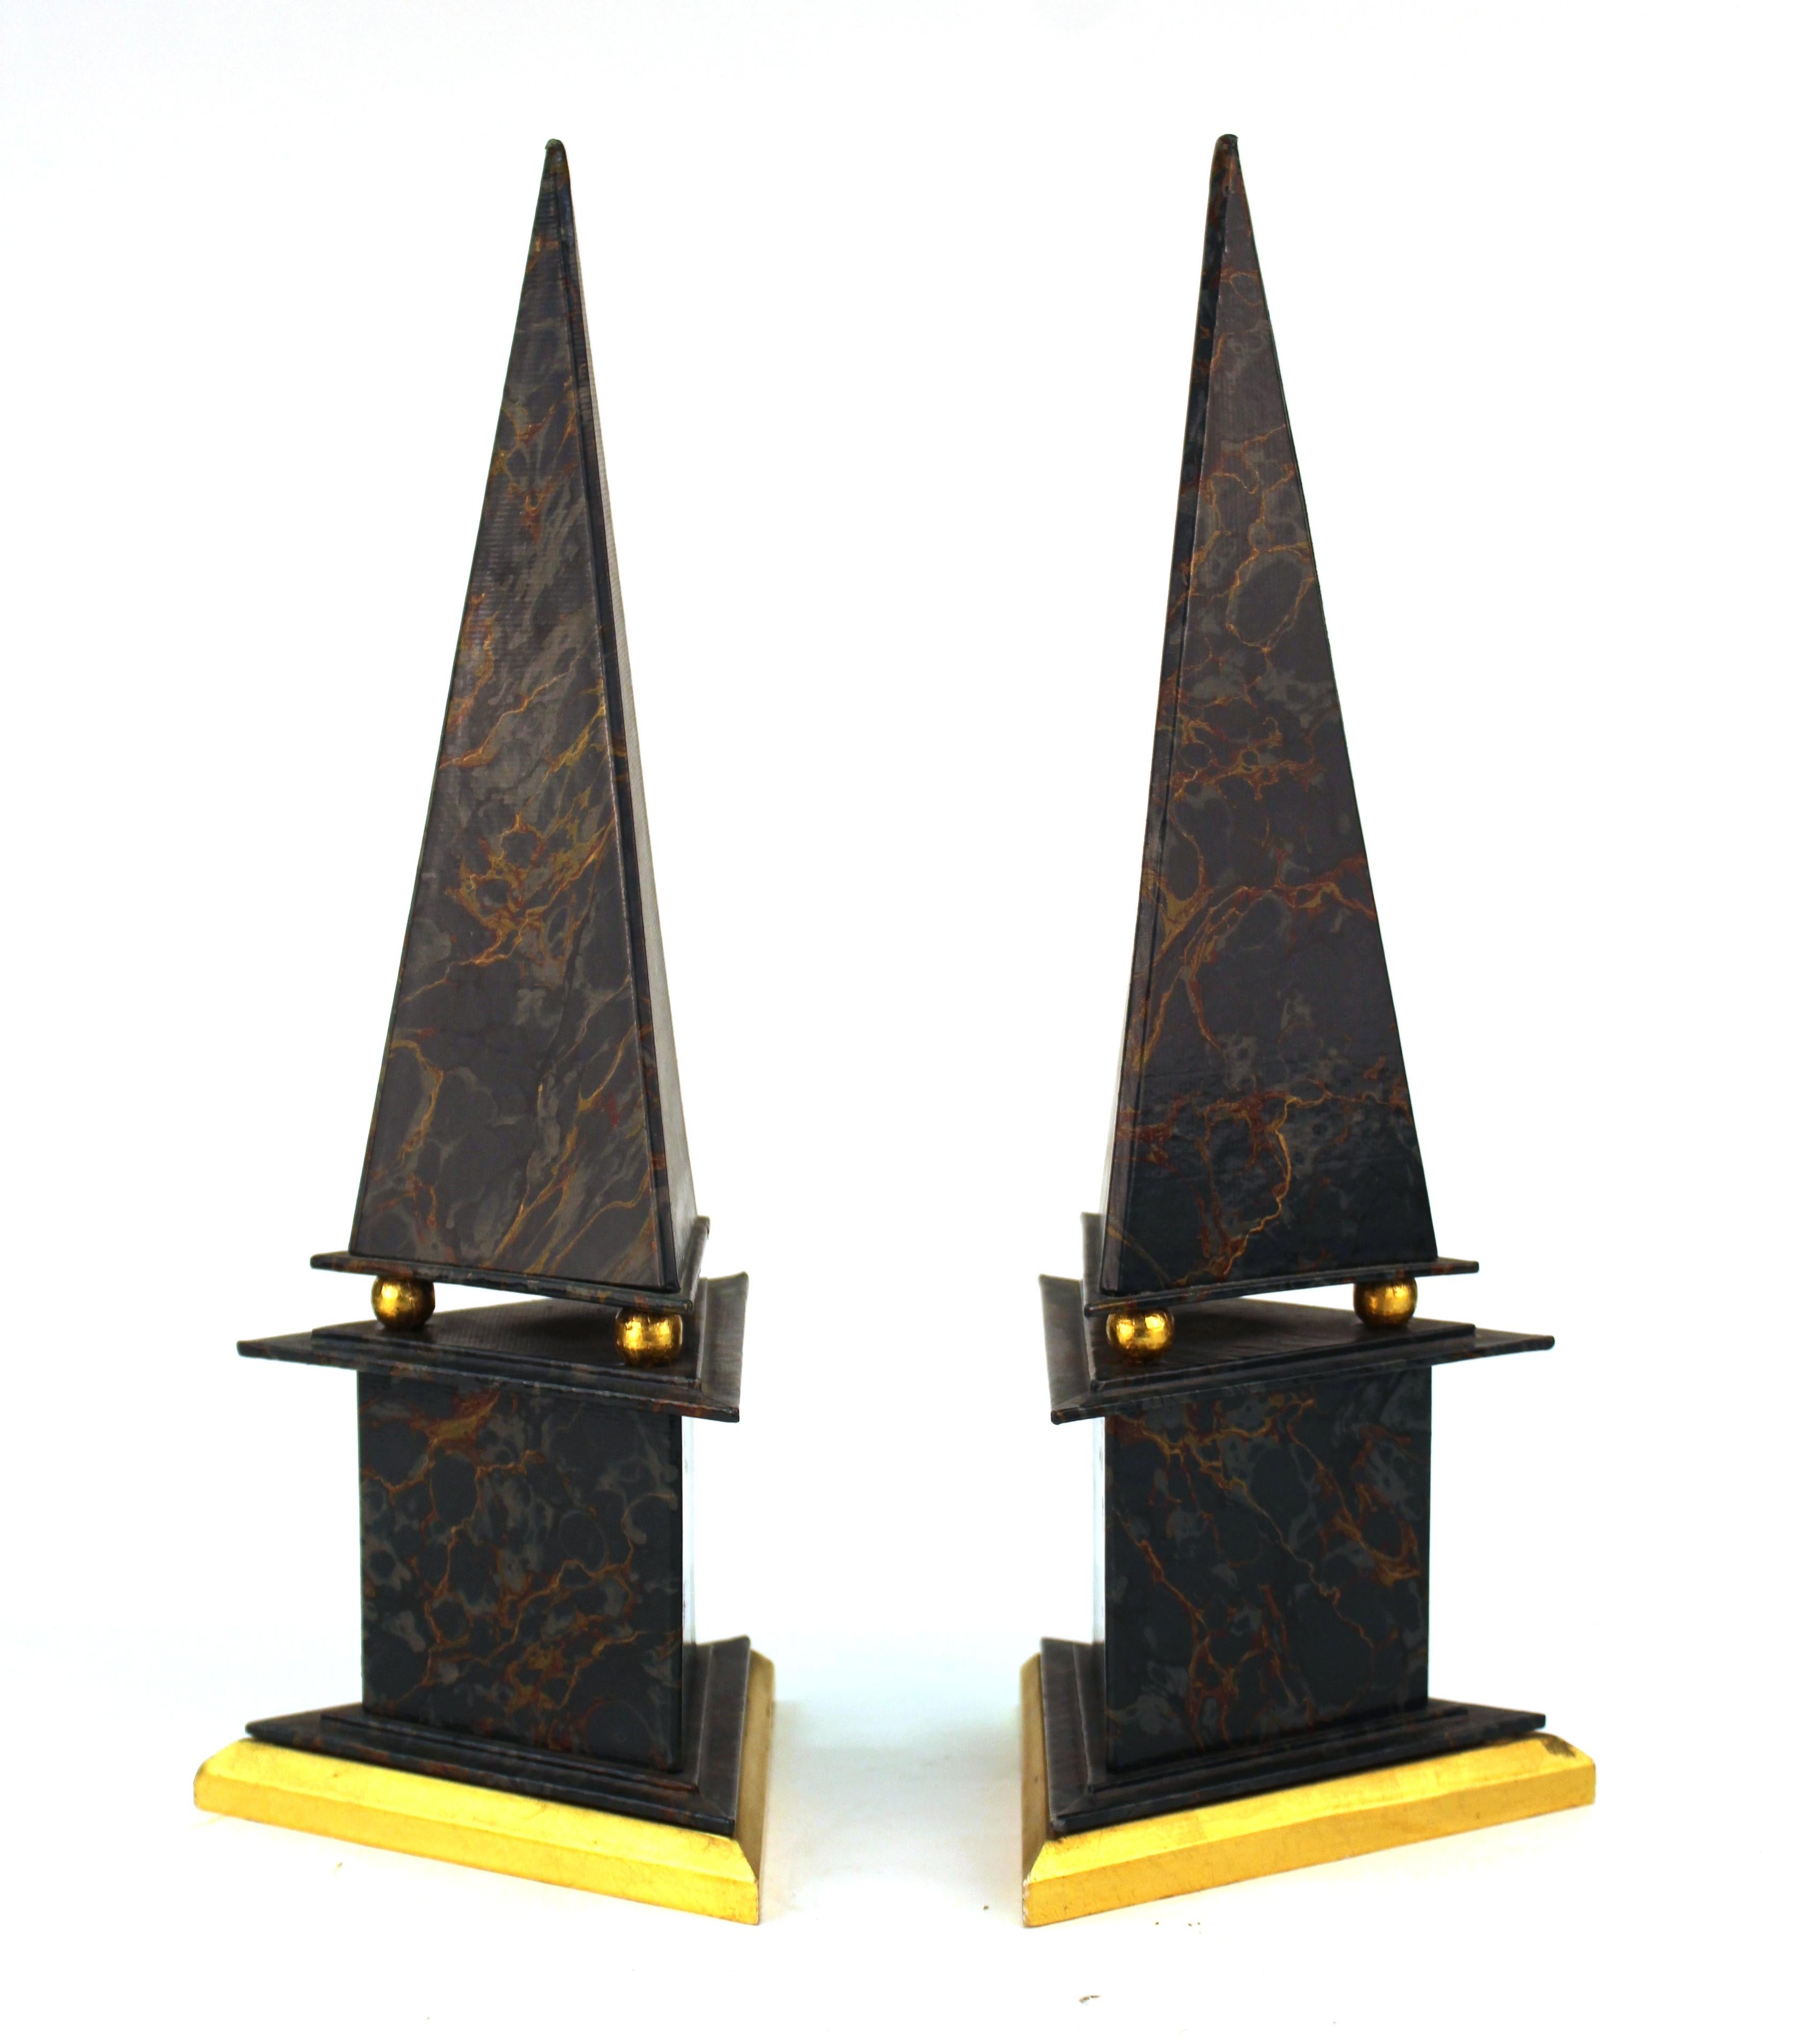 Pair of neoclassical Revival style obelisks made of cardboard with marbled paper and gold foil accents. Each obelisk is triangular shaped and rests atop a base held up by gilt spheres. In great vintage condition.